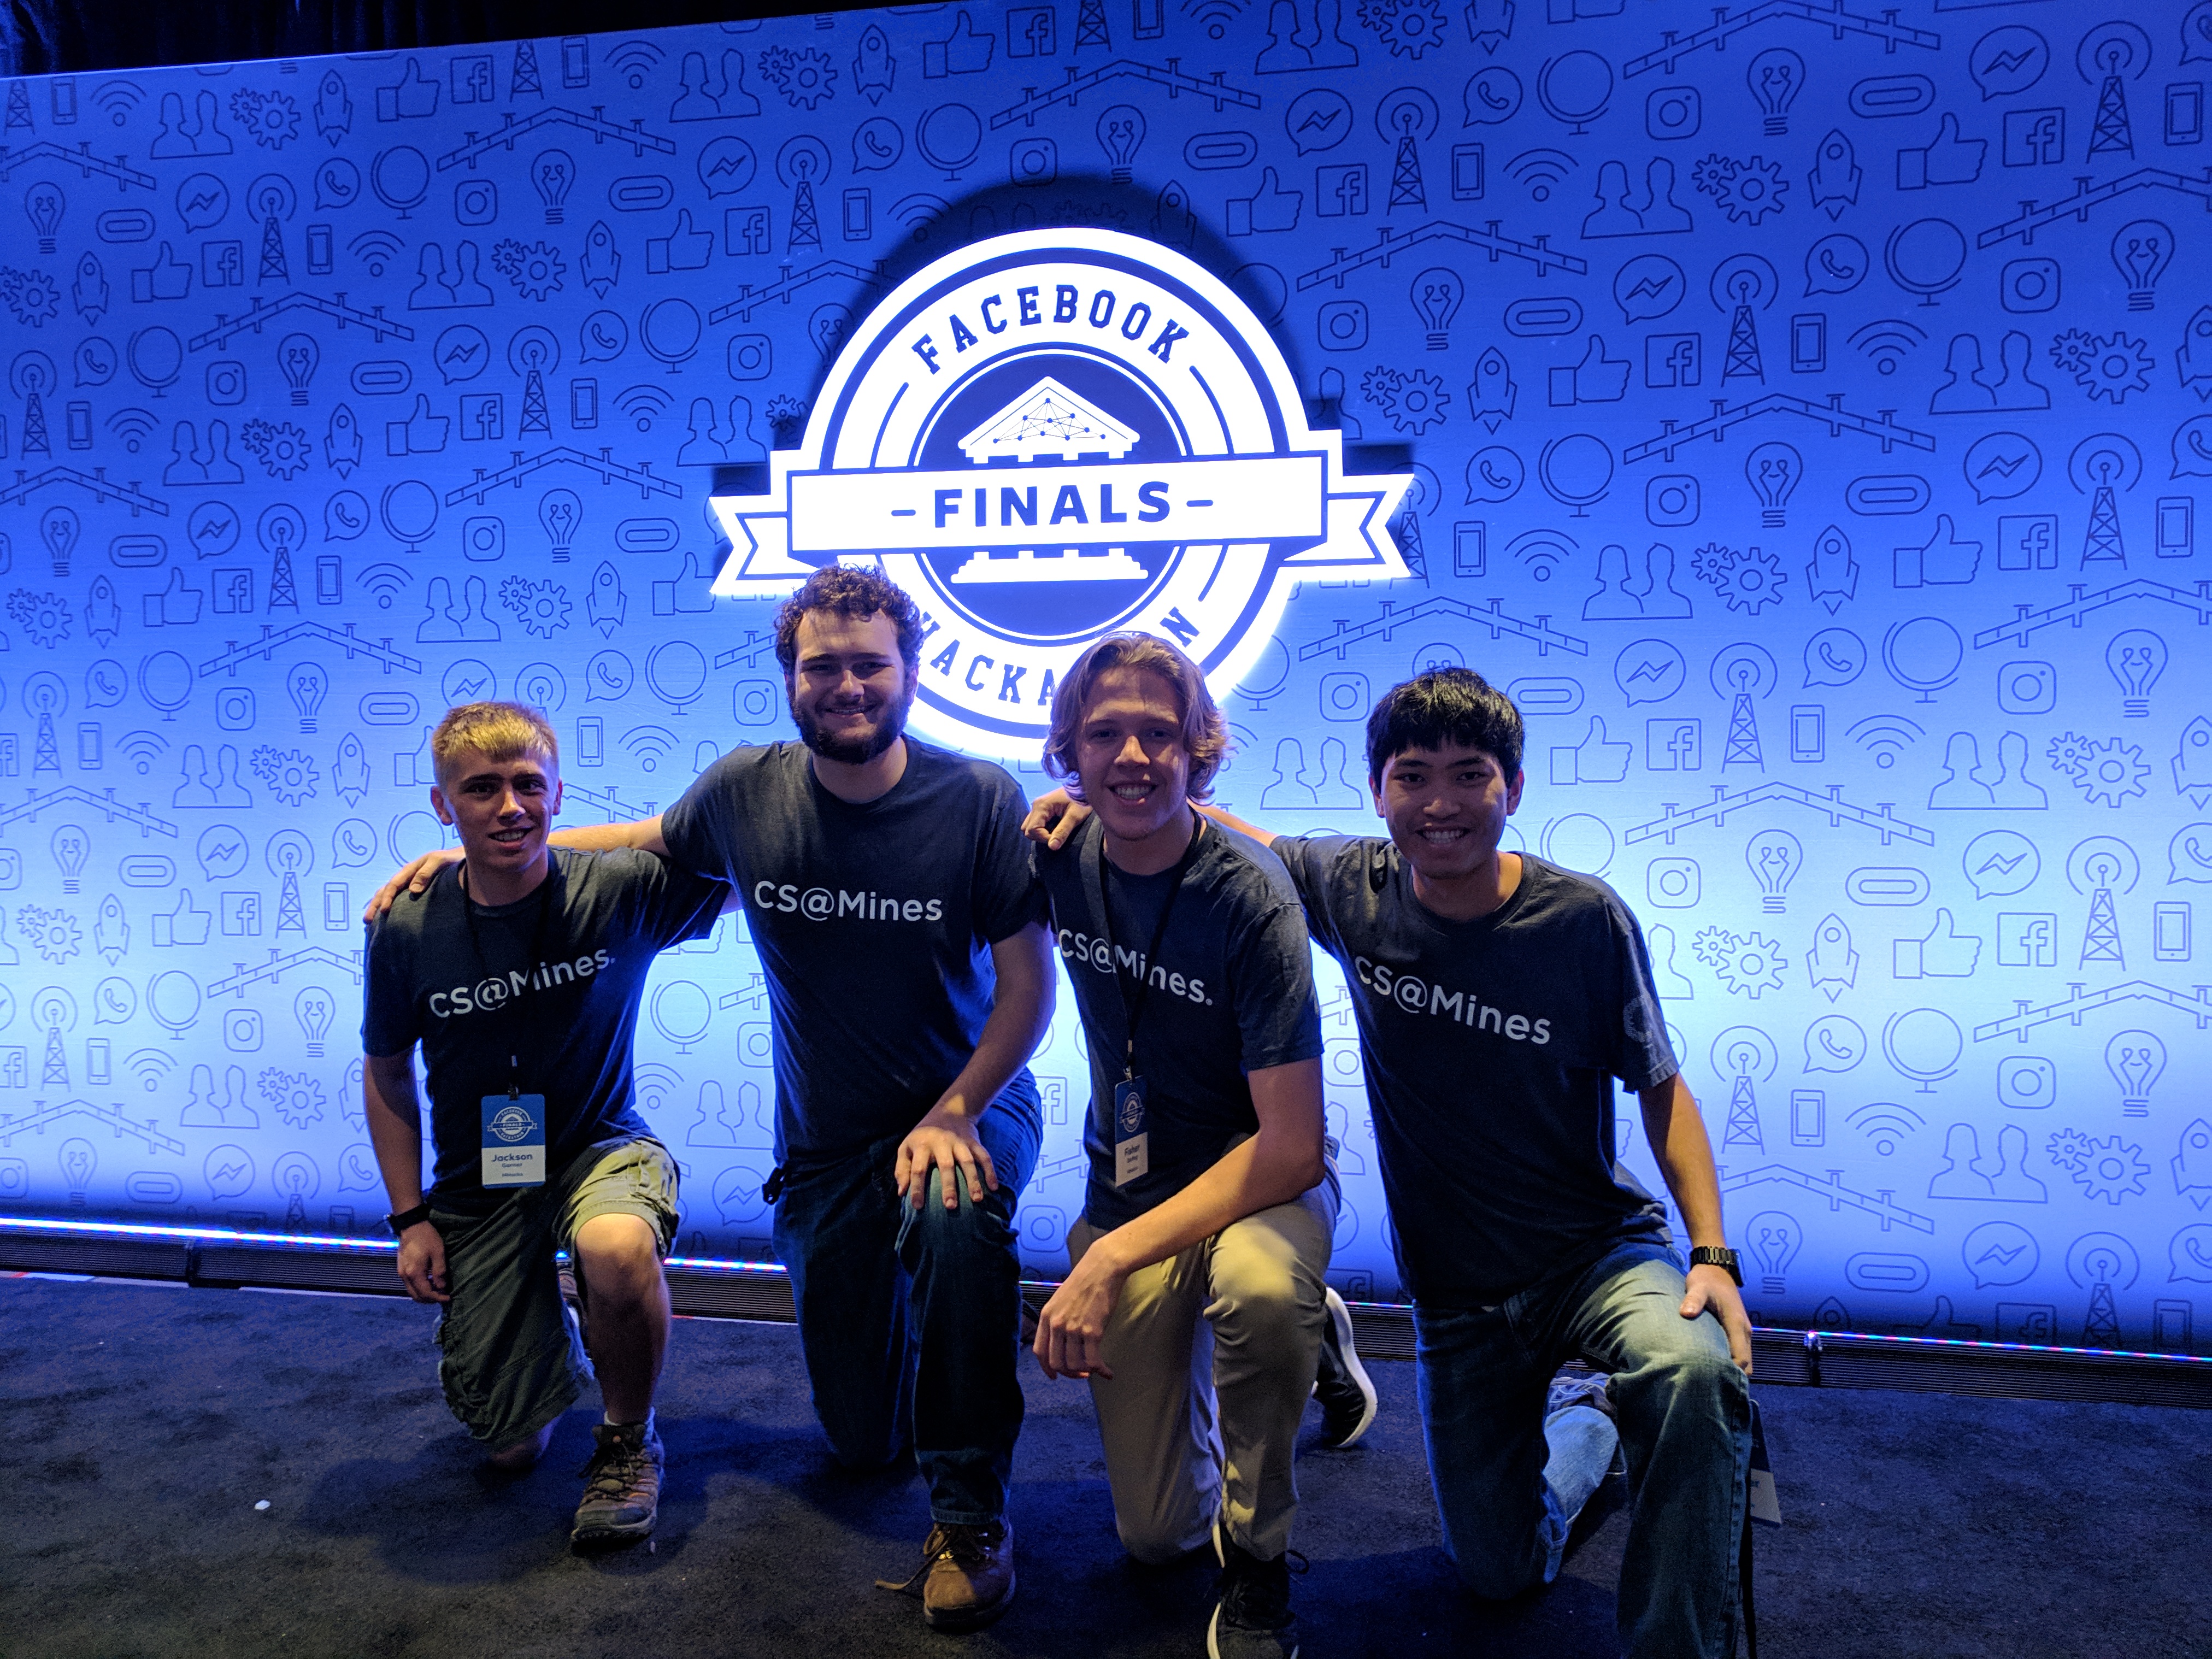 picture of the team on the front stage in front of the Facebook Global Hackathon Finals logo